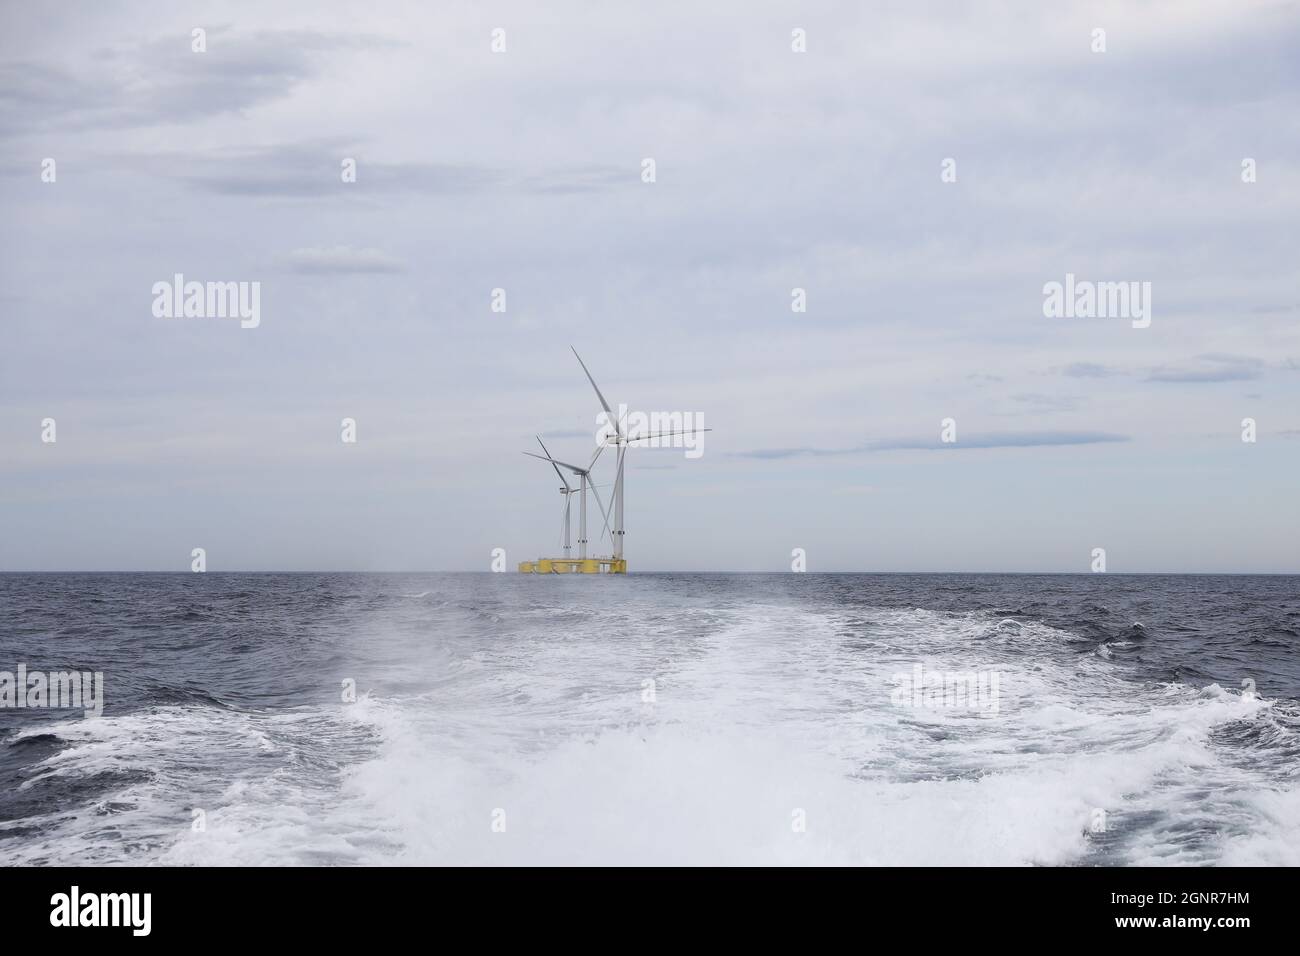 Turbines of the WindFloat Atlantic Project, a floating offshore wind-power  generating platform, are seen 20 kilometers off the coast in Viana do  Castelo, Portugal, September 23, 2021. Picture taken September 23, 2021.